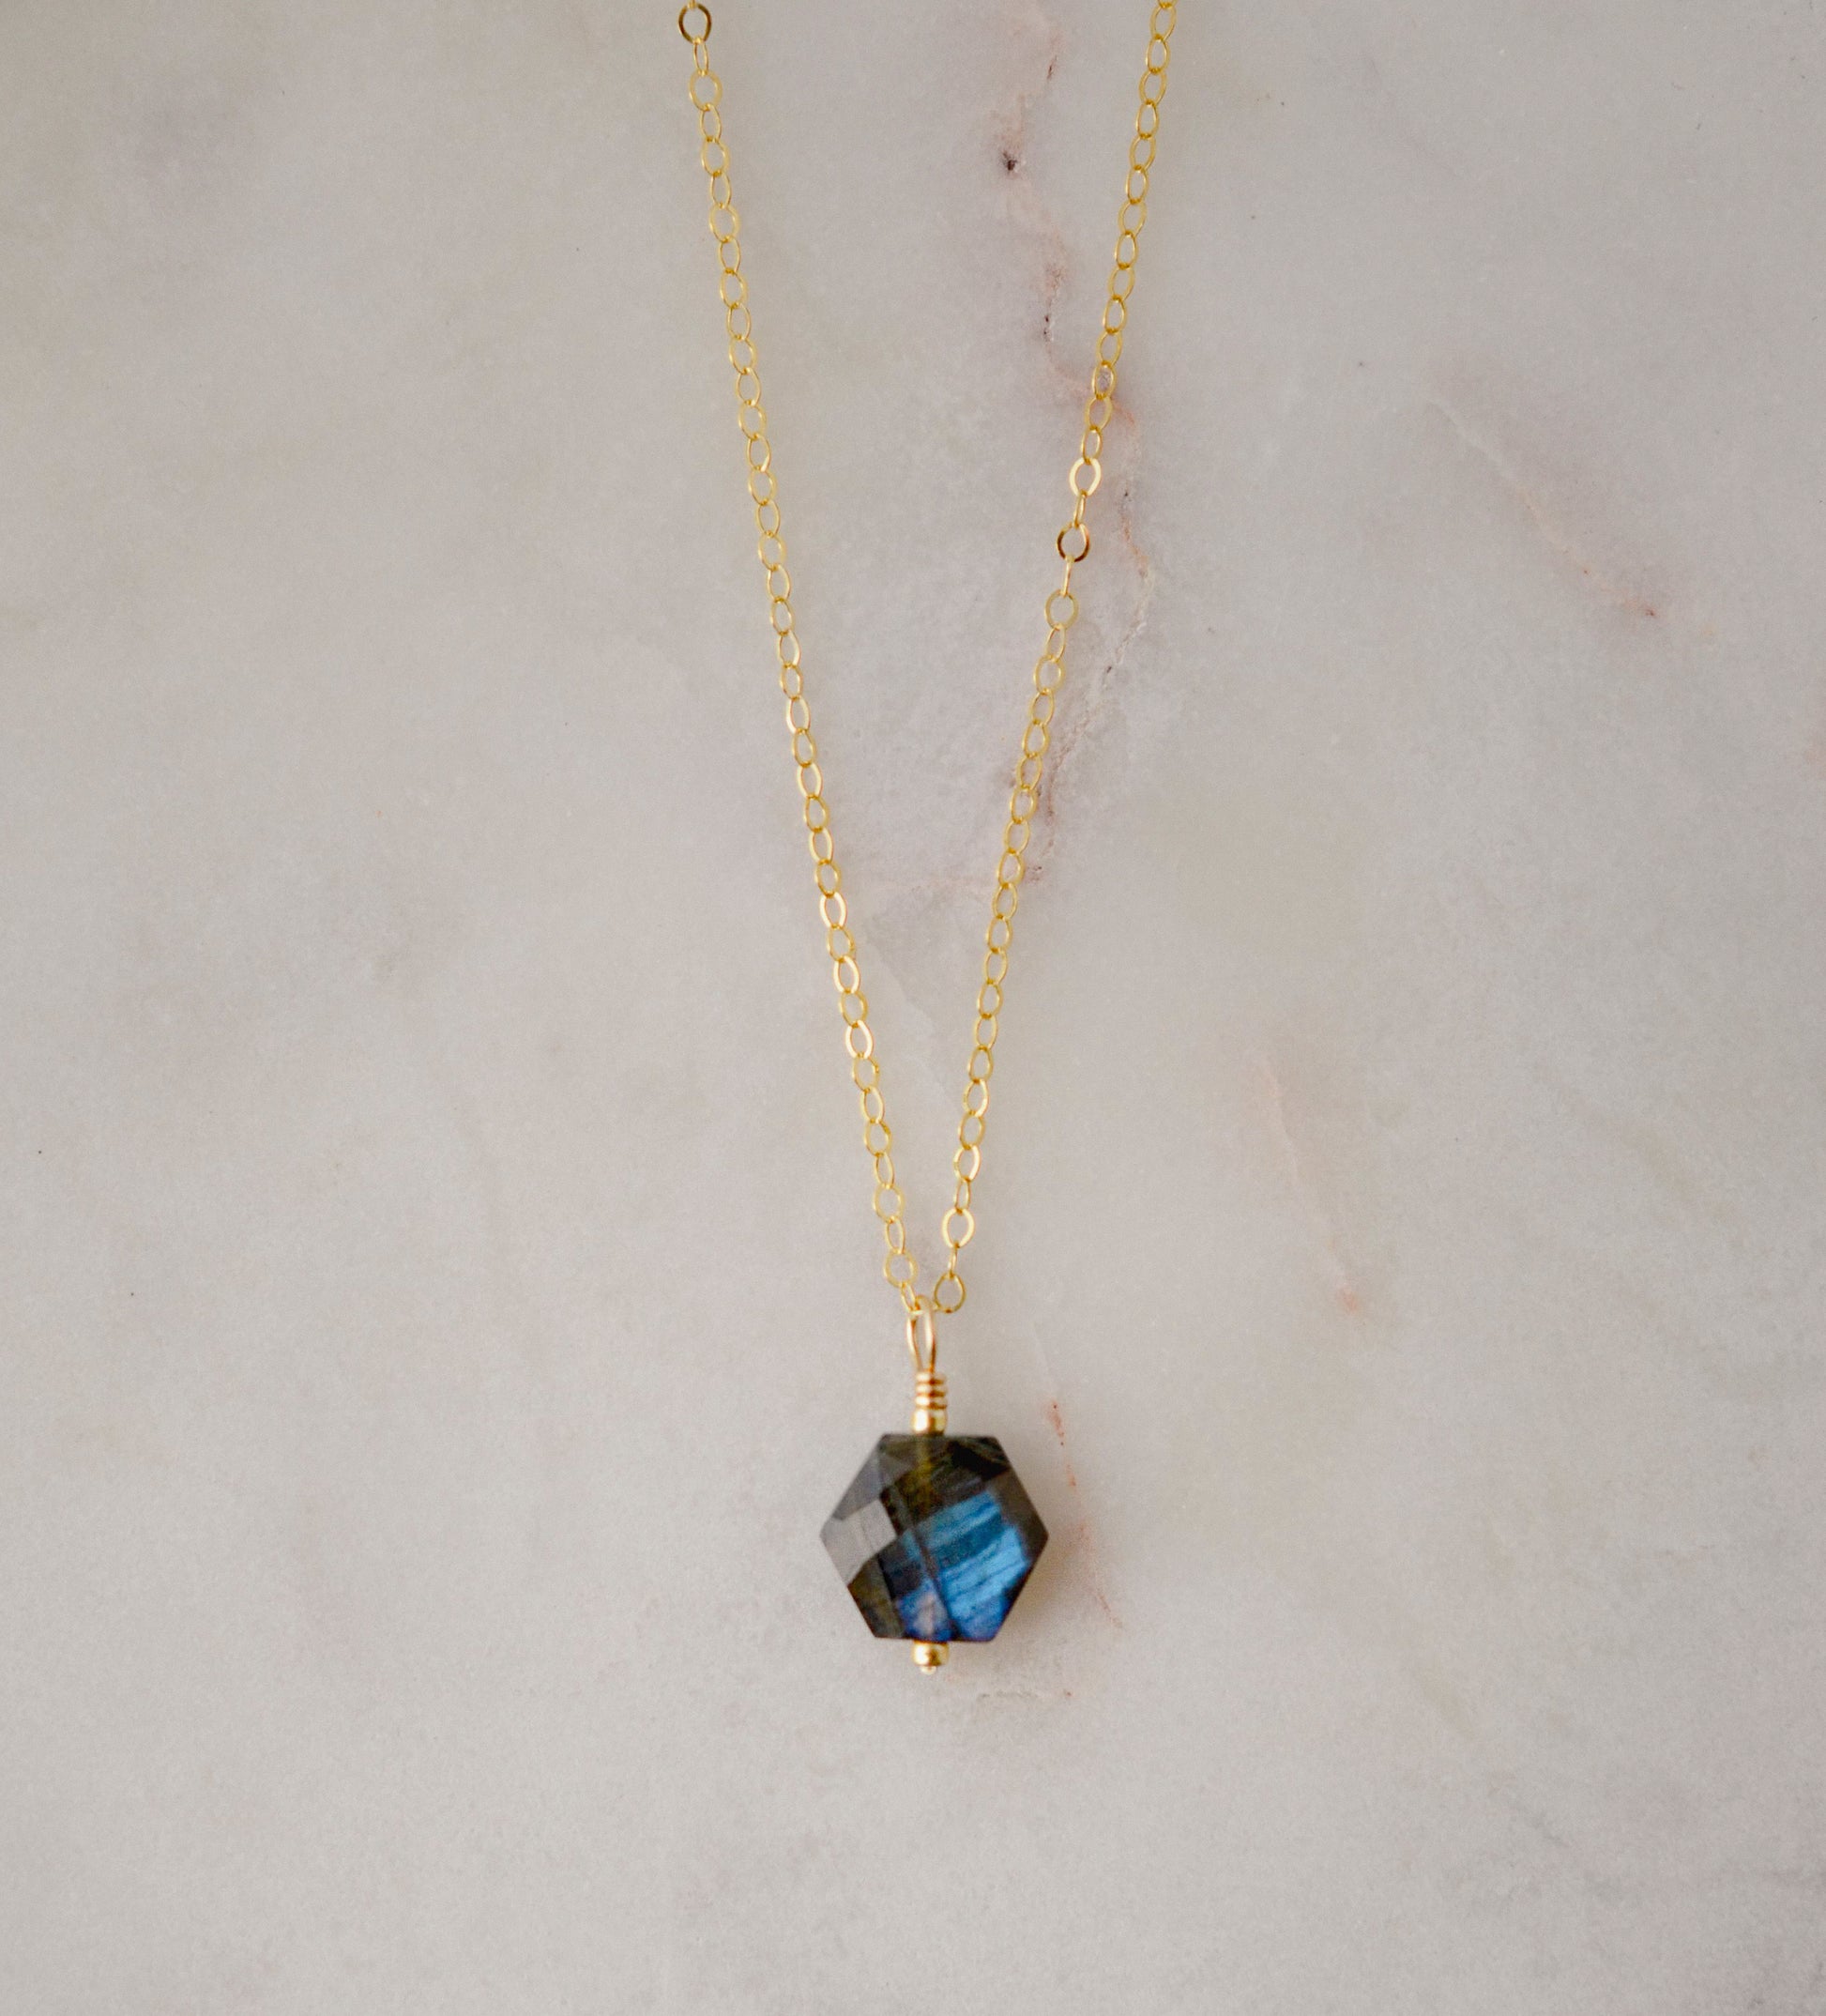 Blue flashing labradorite pendant cut into a hexagonal shape and suspended onto a gold chain.